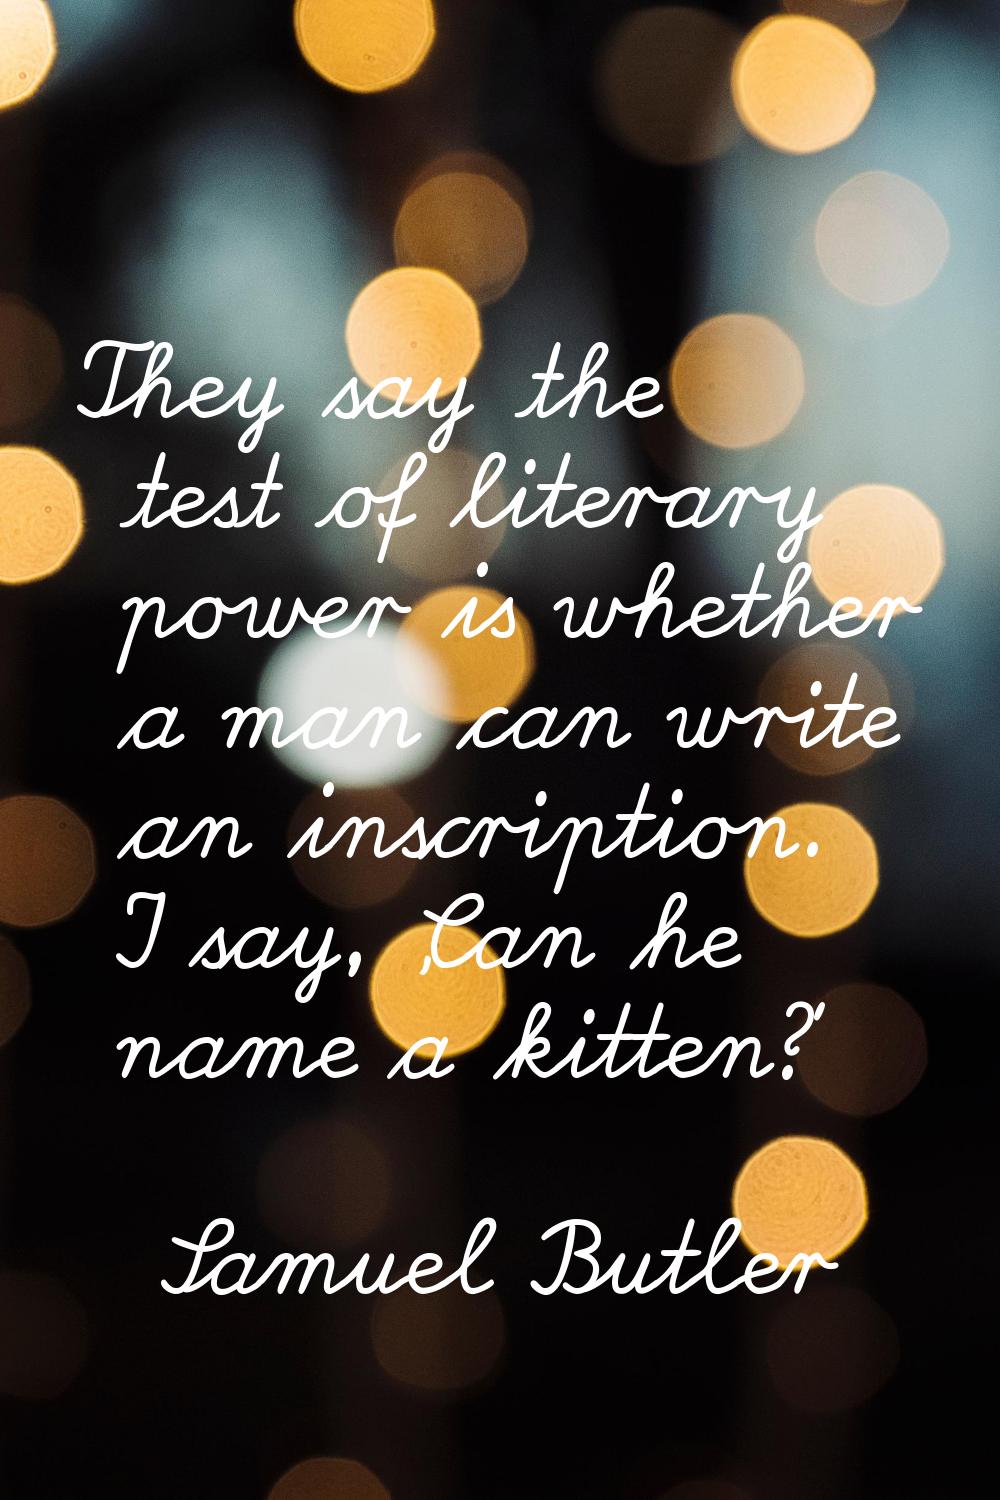 They say the test of literary power is whether a man can write an inscription. I say, 'Can he name 